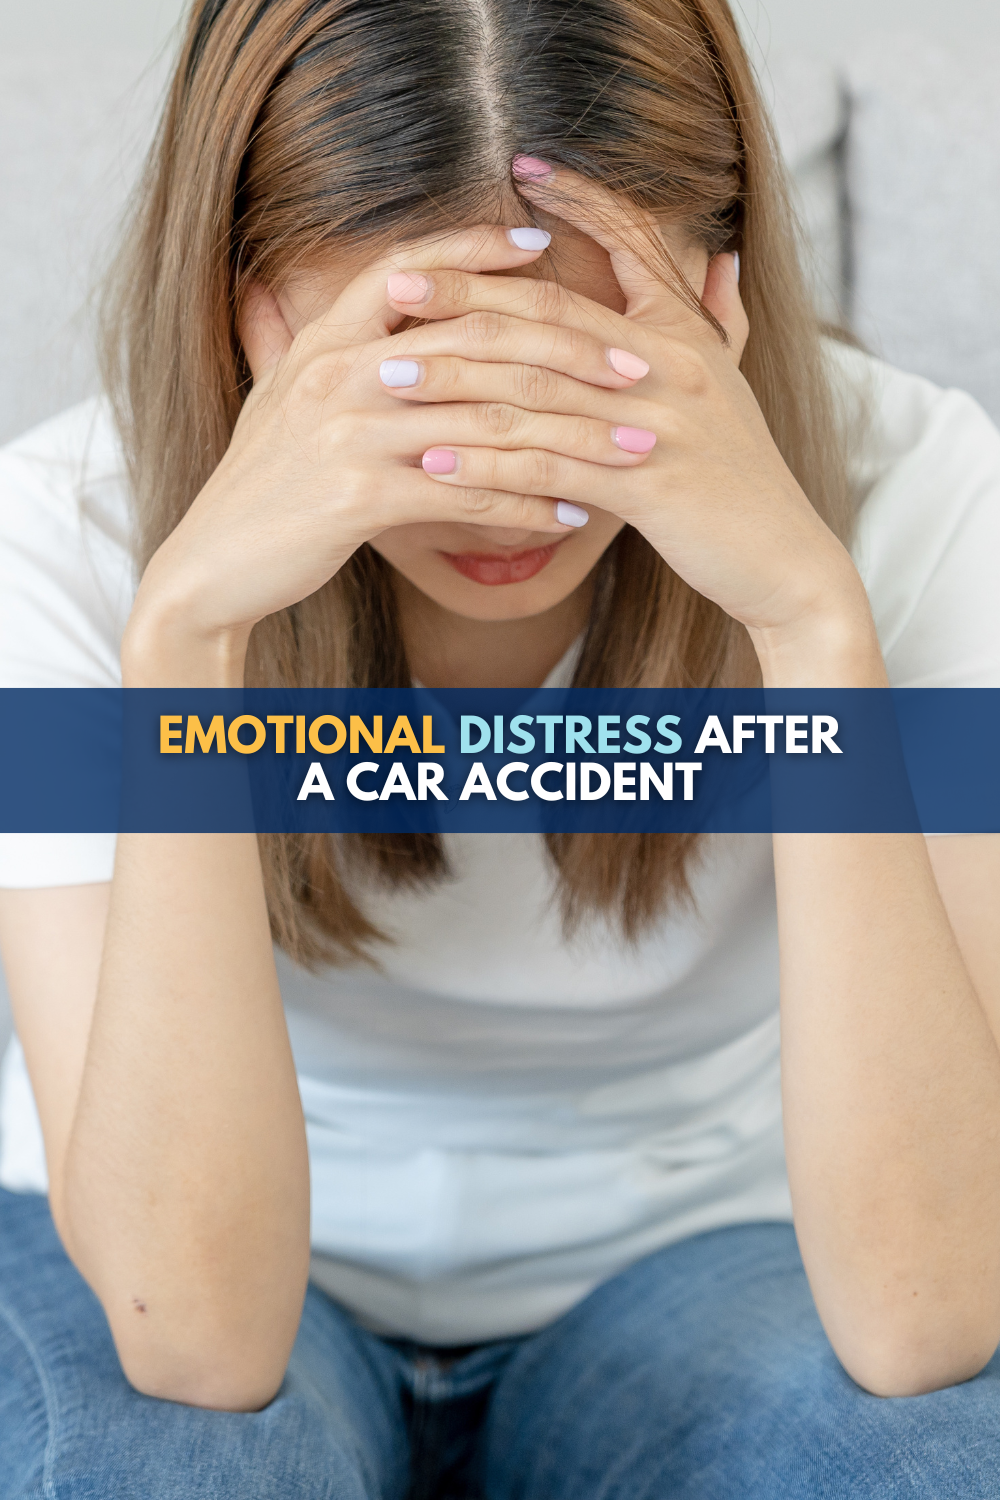 Emotional Distress And Trauma After A Car Accident In Michigan: What You Need To Know